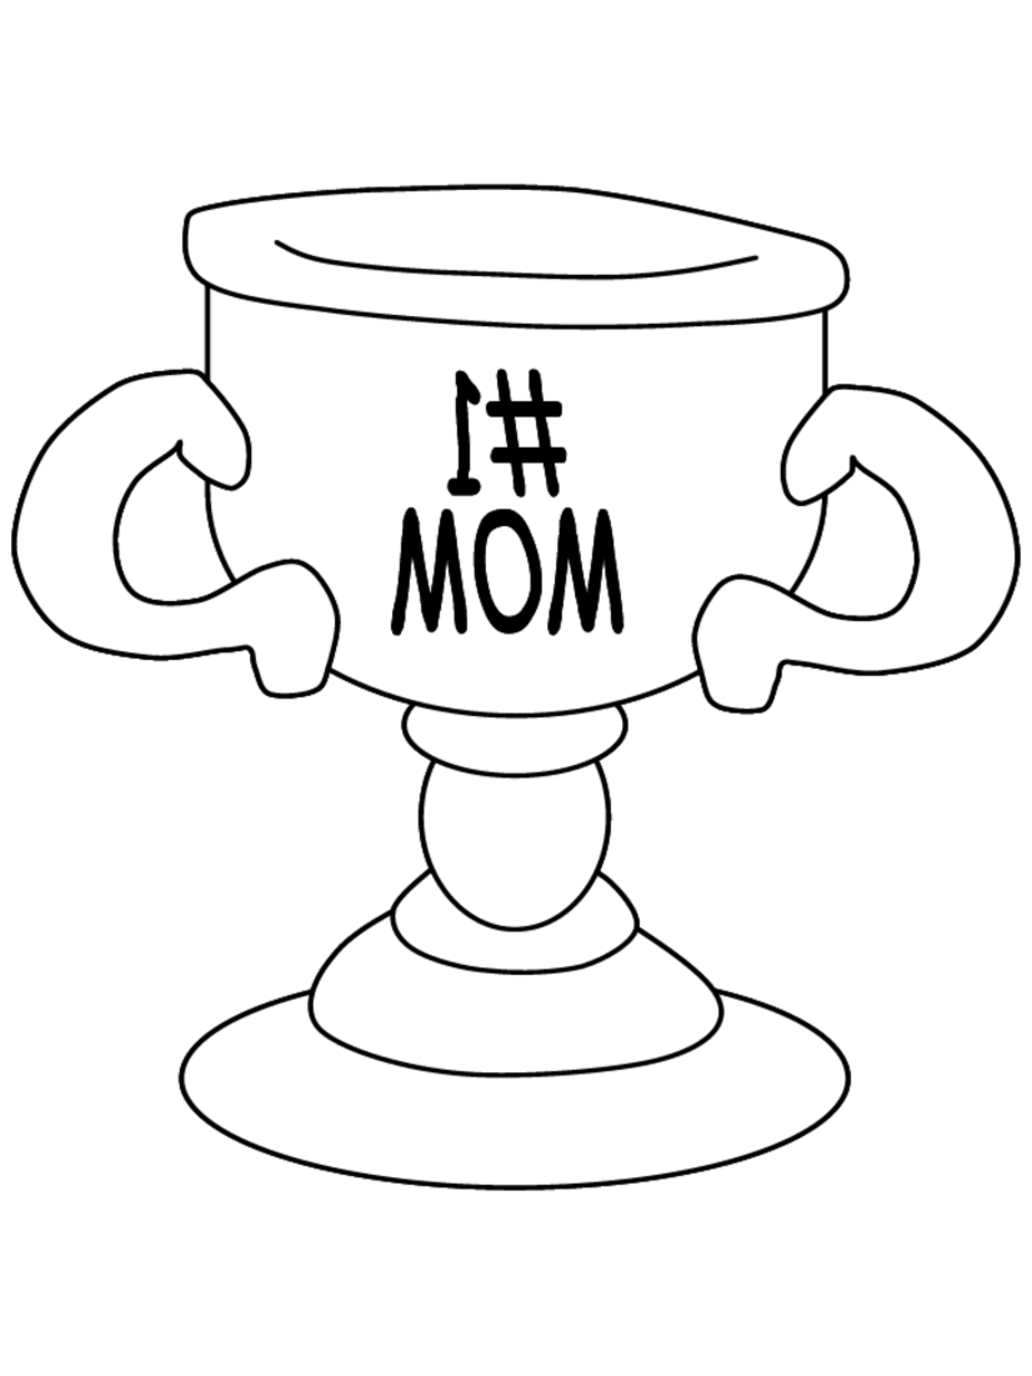 Mother's Day Tattoo Design by creativeodditiesart on deviantART | Mothers  day drawings, Mother and daughter drawing, Mothers day coloring pages